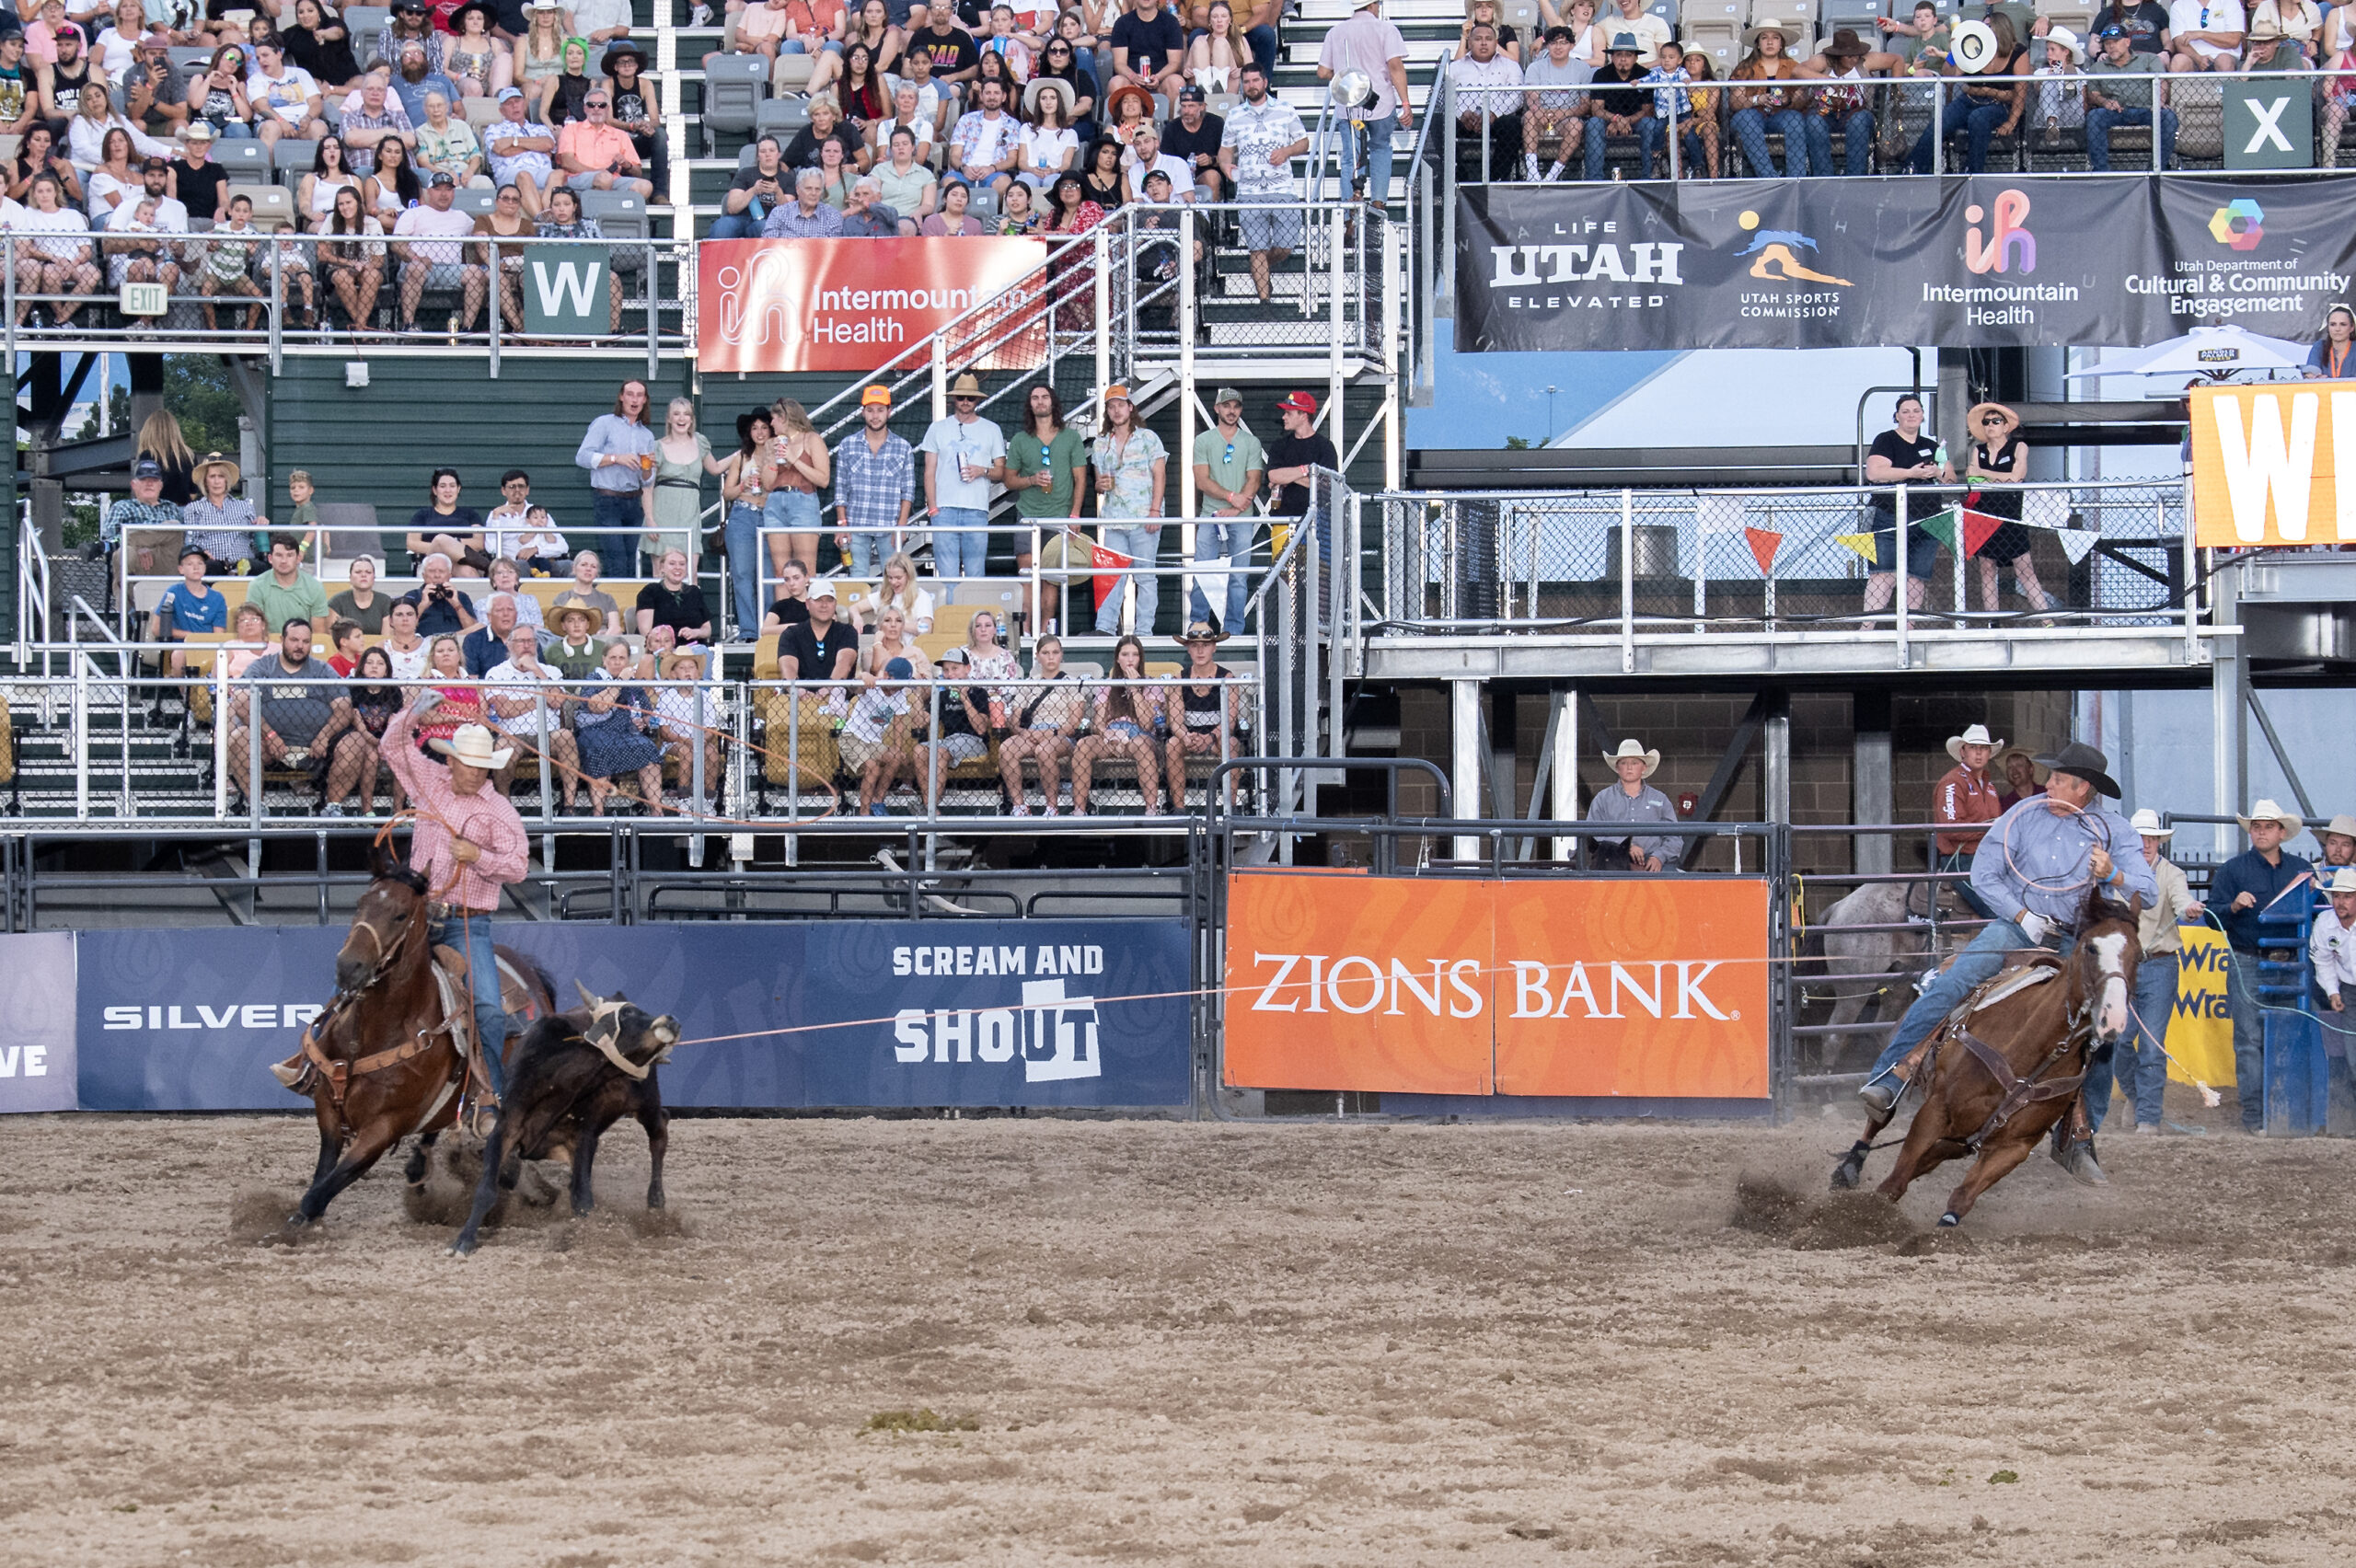 How's it Going at the 2023 Days of '47 Rodeo in Salt Lake City? The